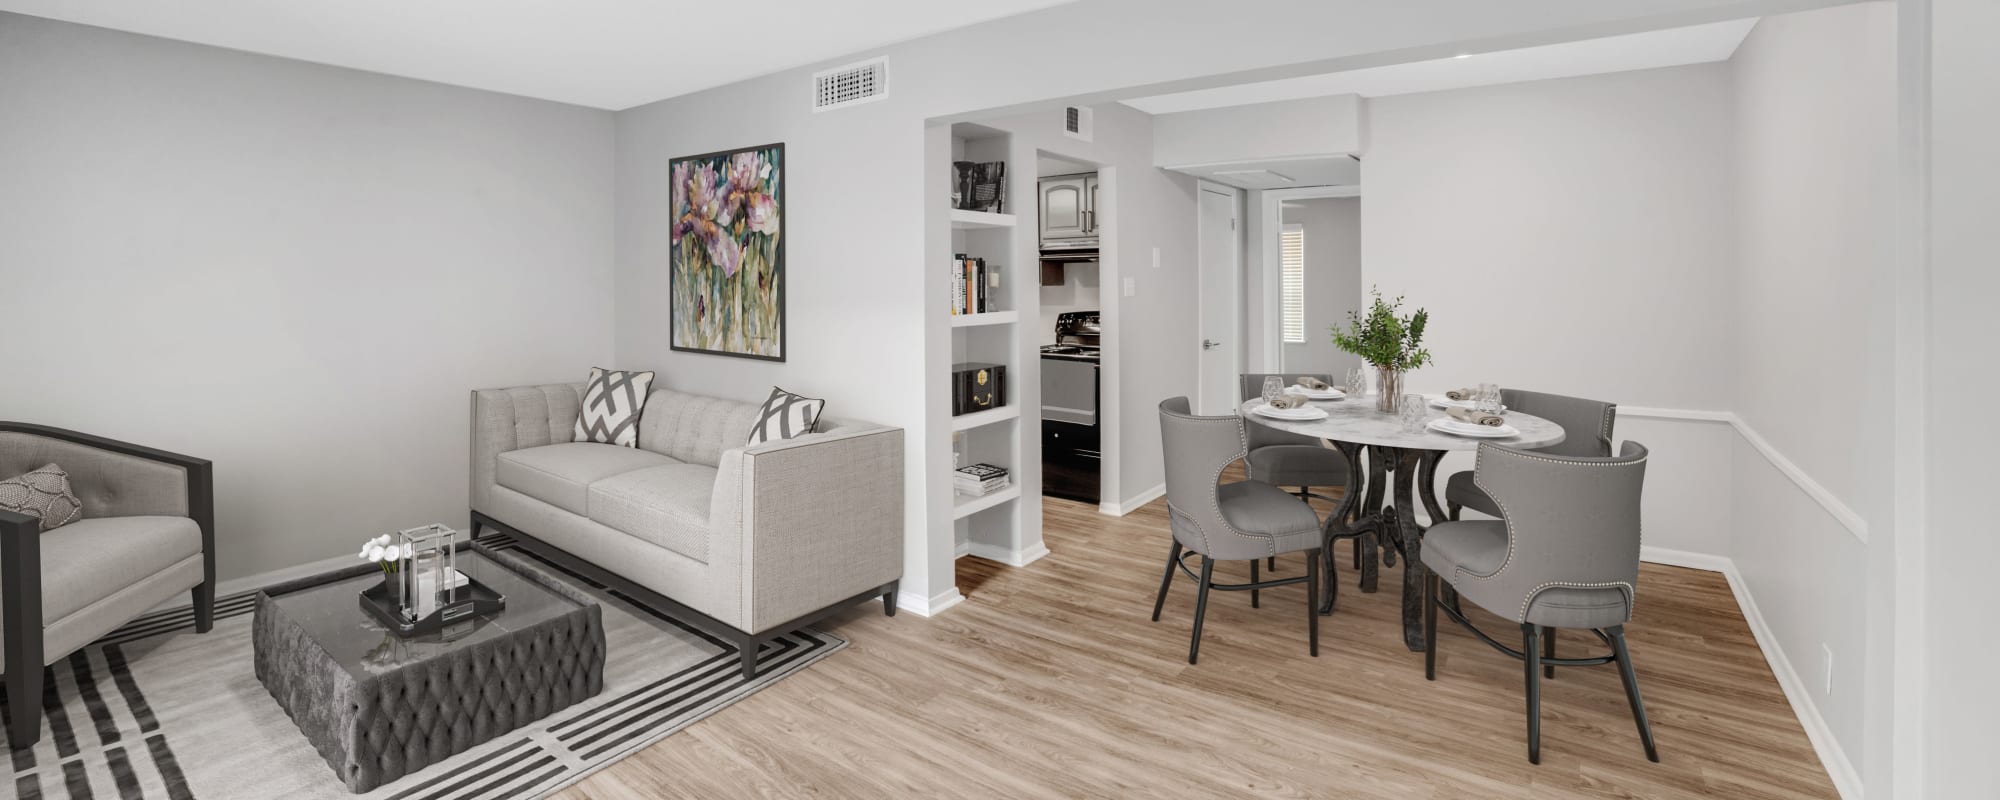 Apartments at The Rylan in Metairie, Louisiana